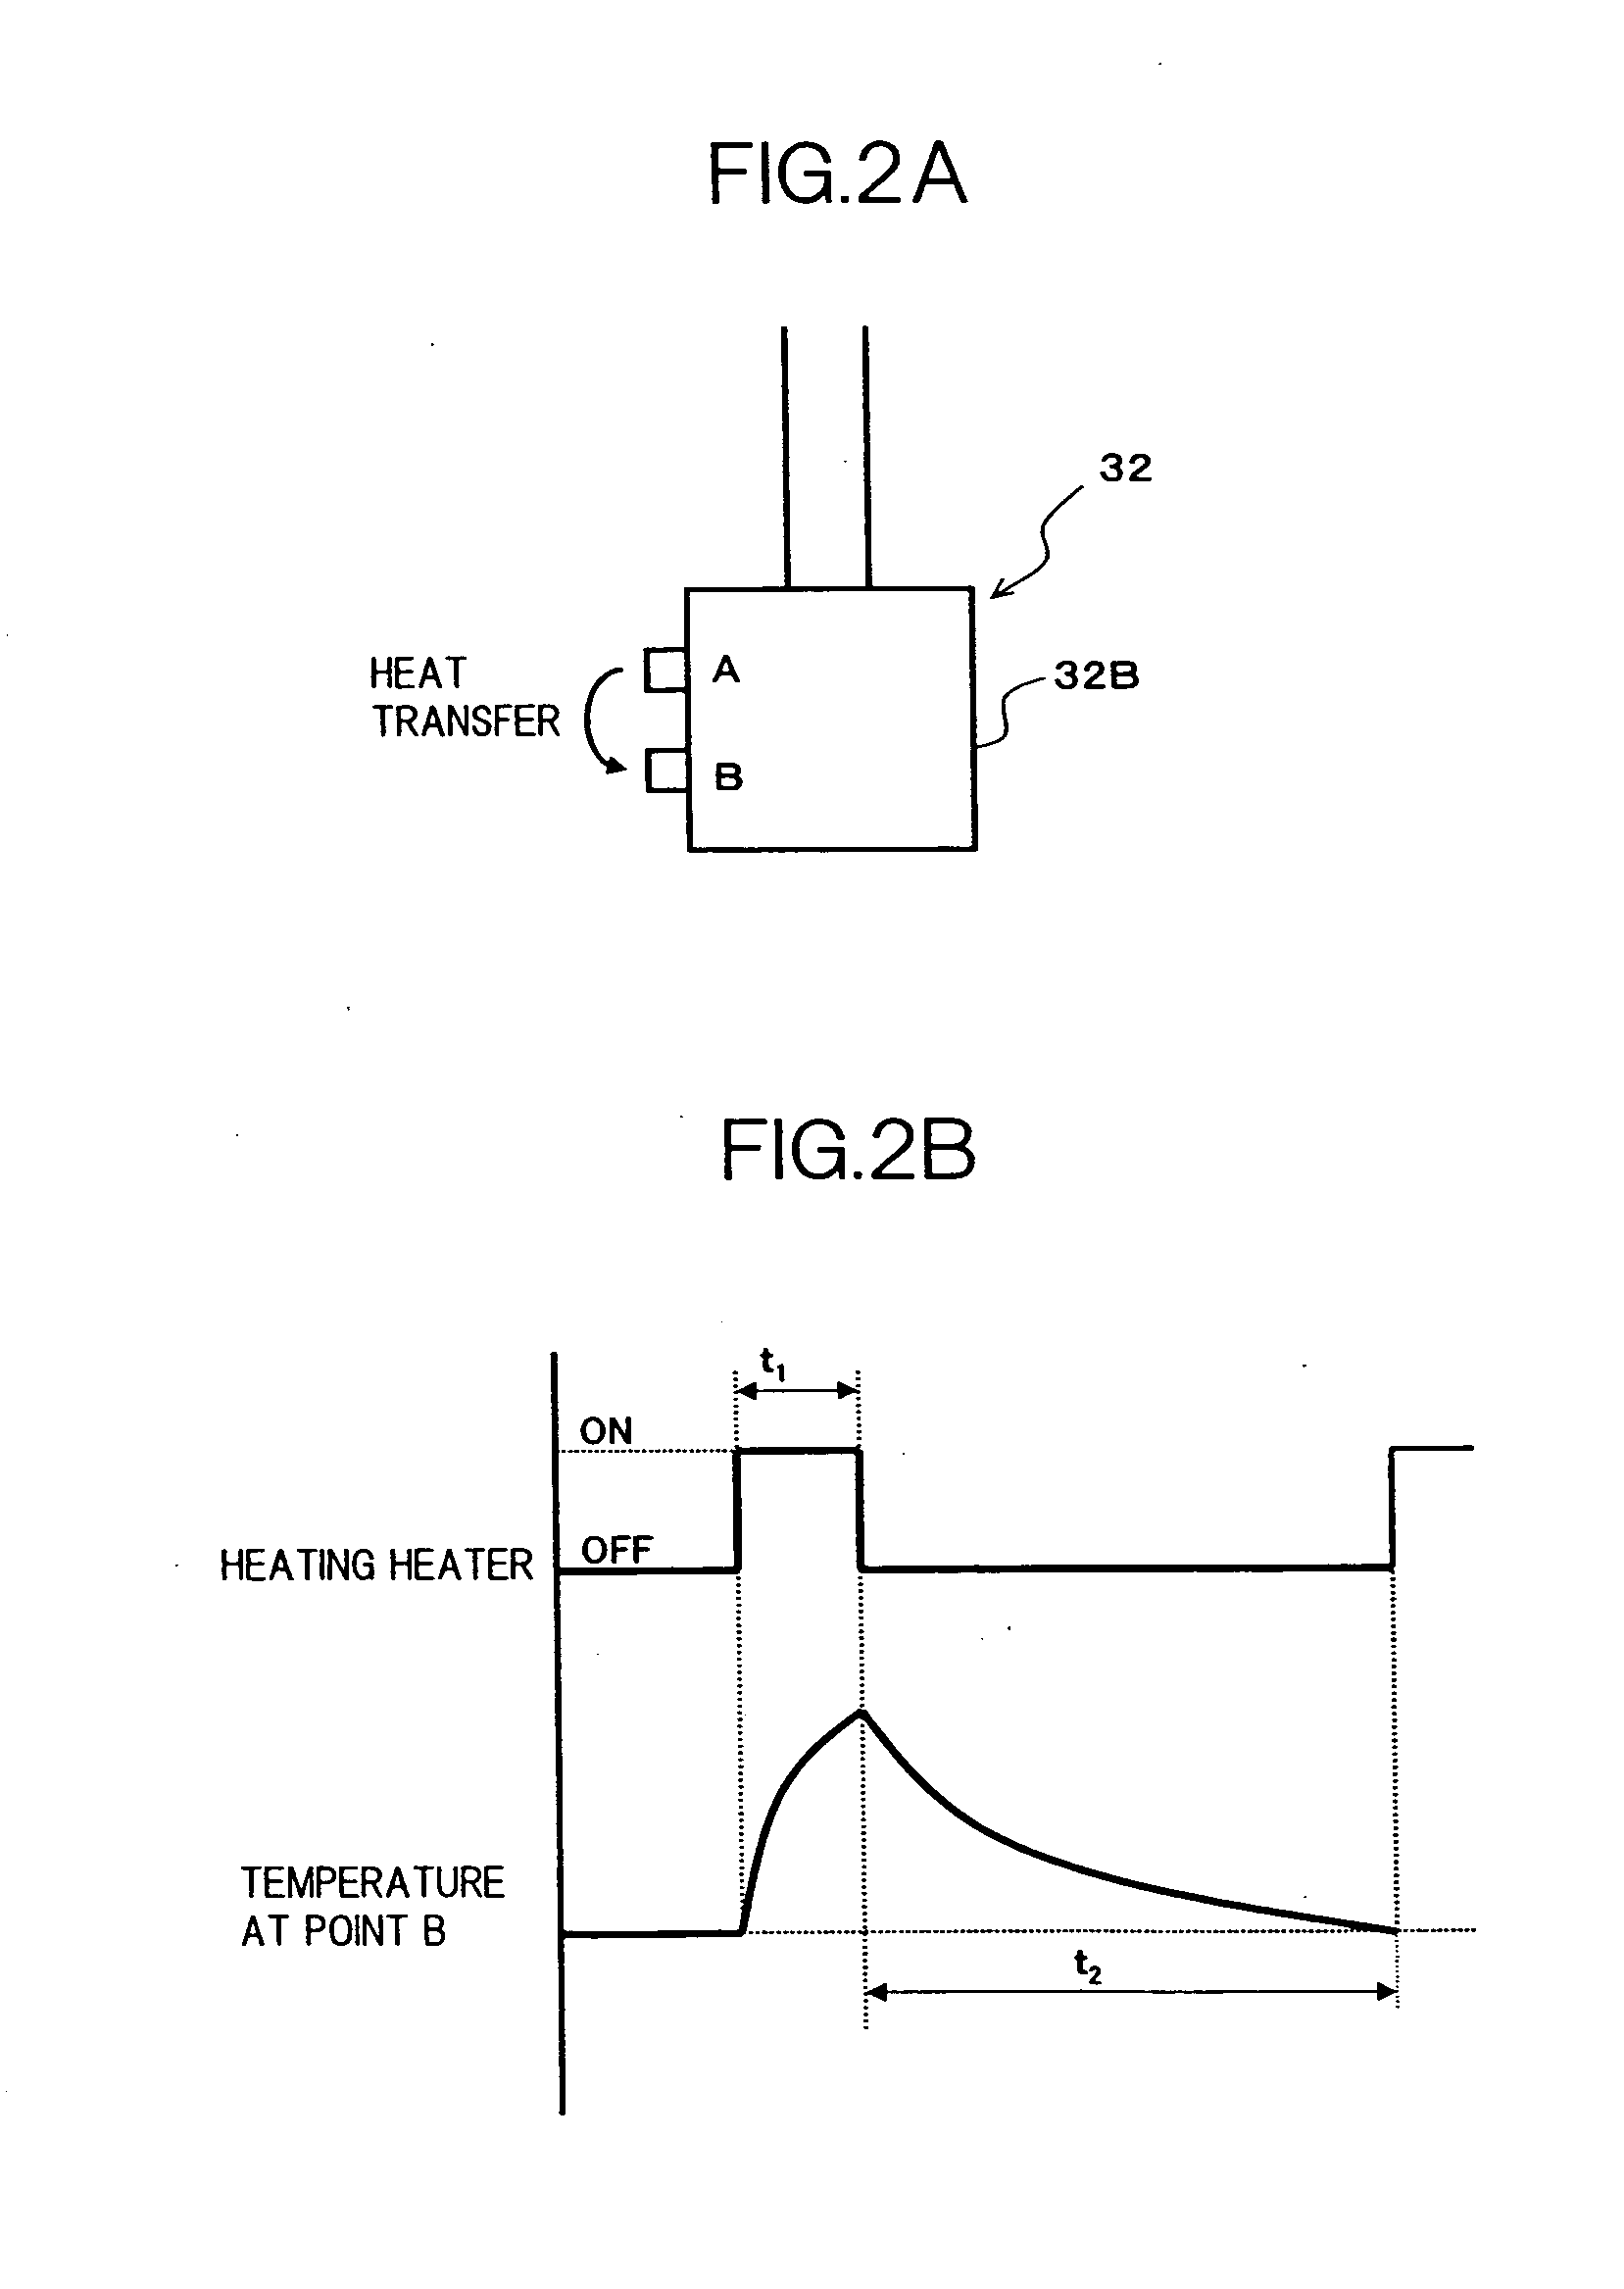 Apparatus for Detecting Concentration and Remaining Amount of Liquid Reducing Agent